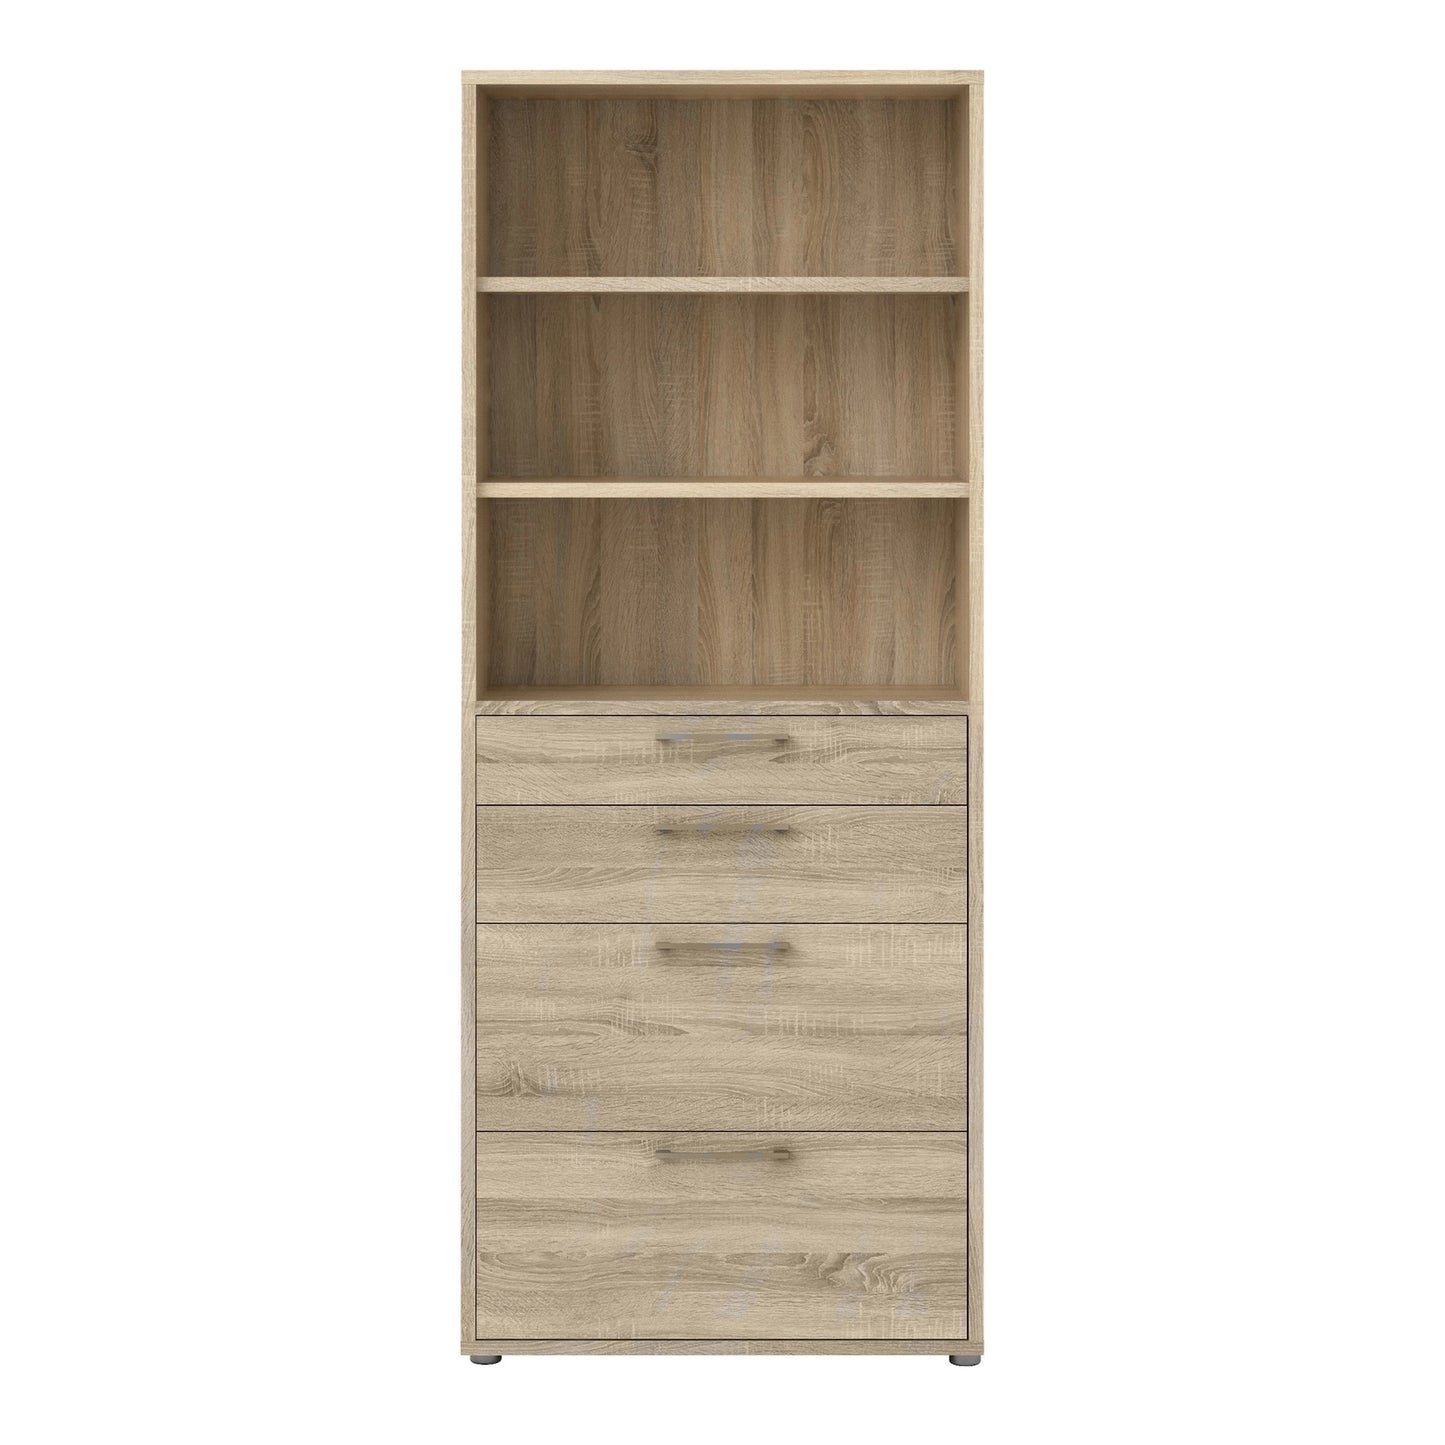 Furniture To Go Prima Bookcase 2 Shelves with 2 Drawers + 2 File Drawers in Oak